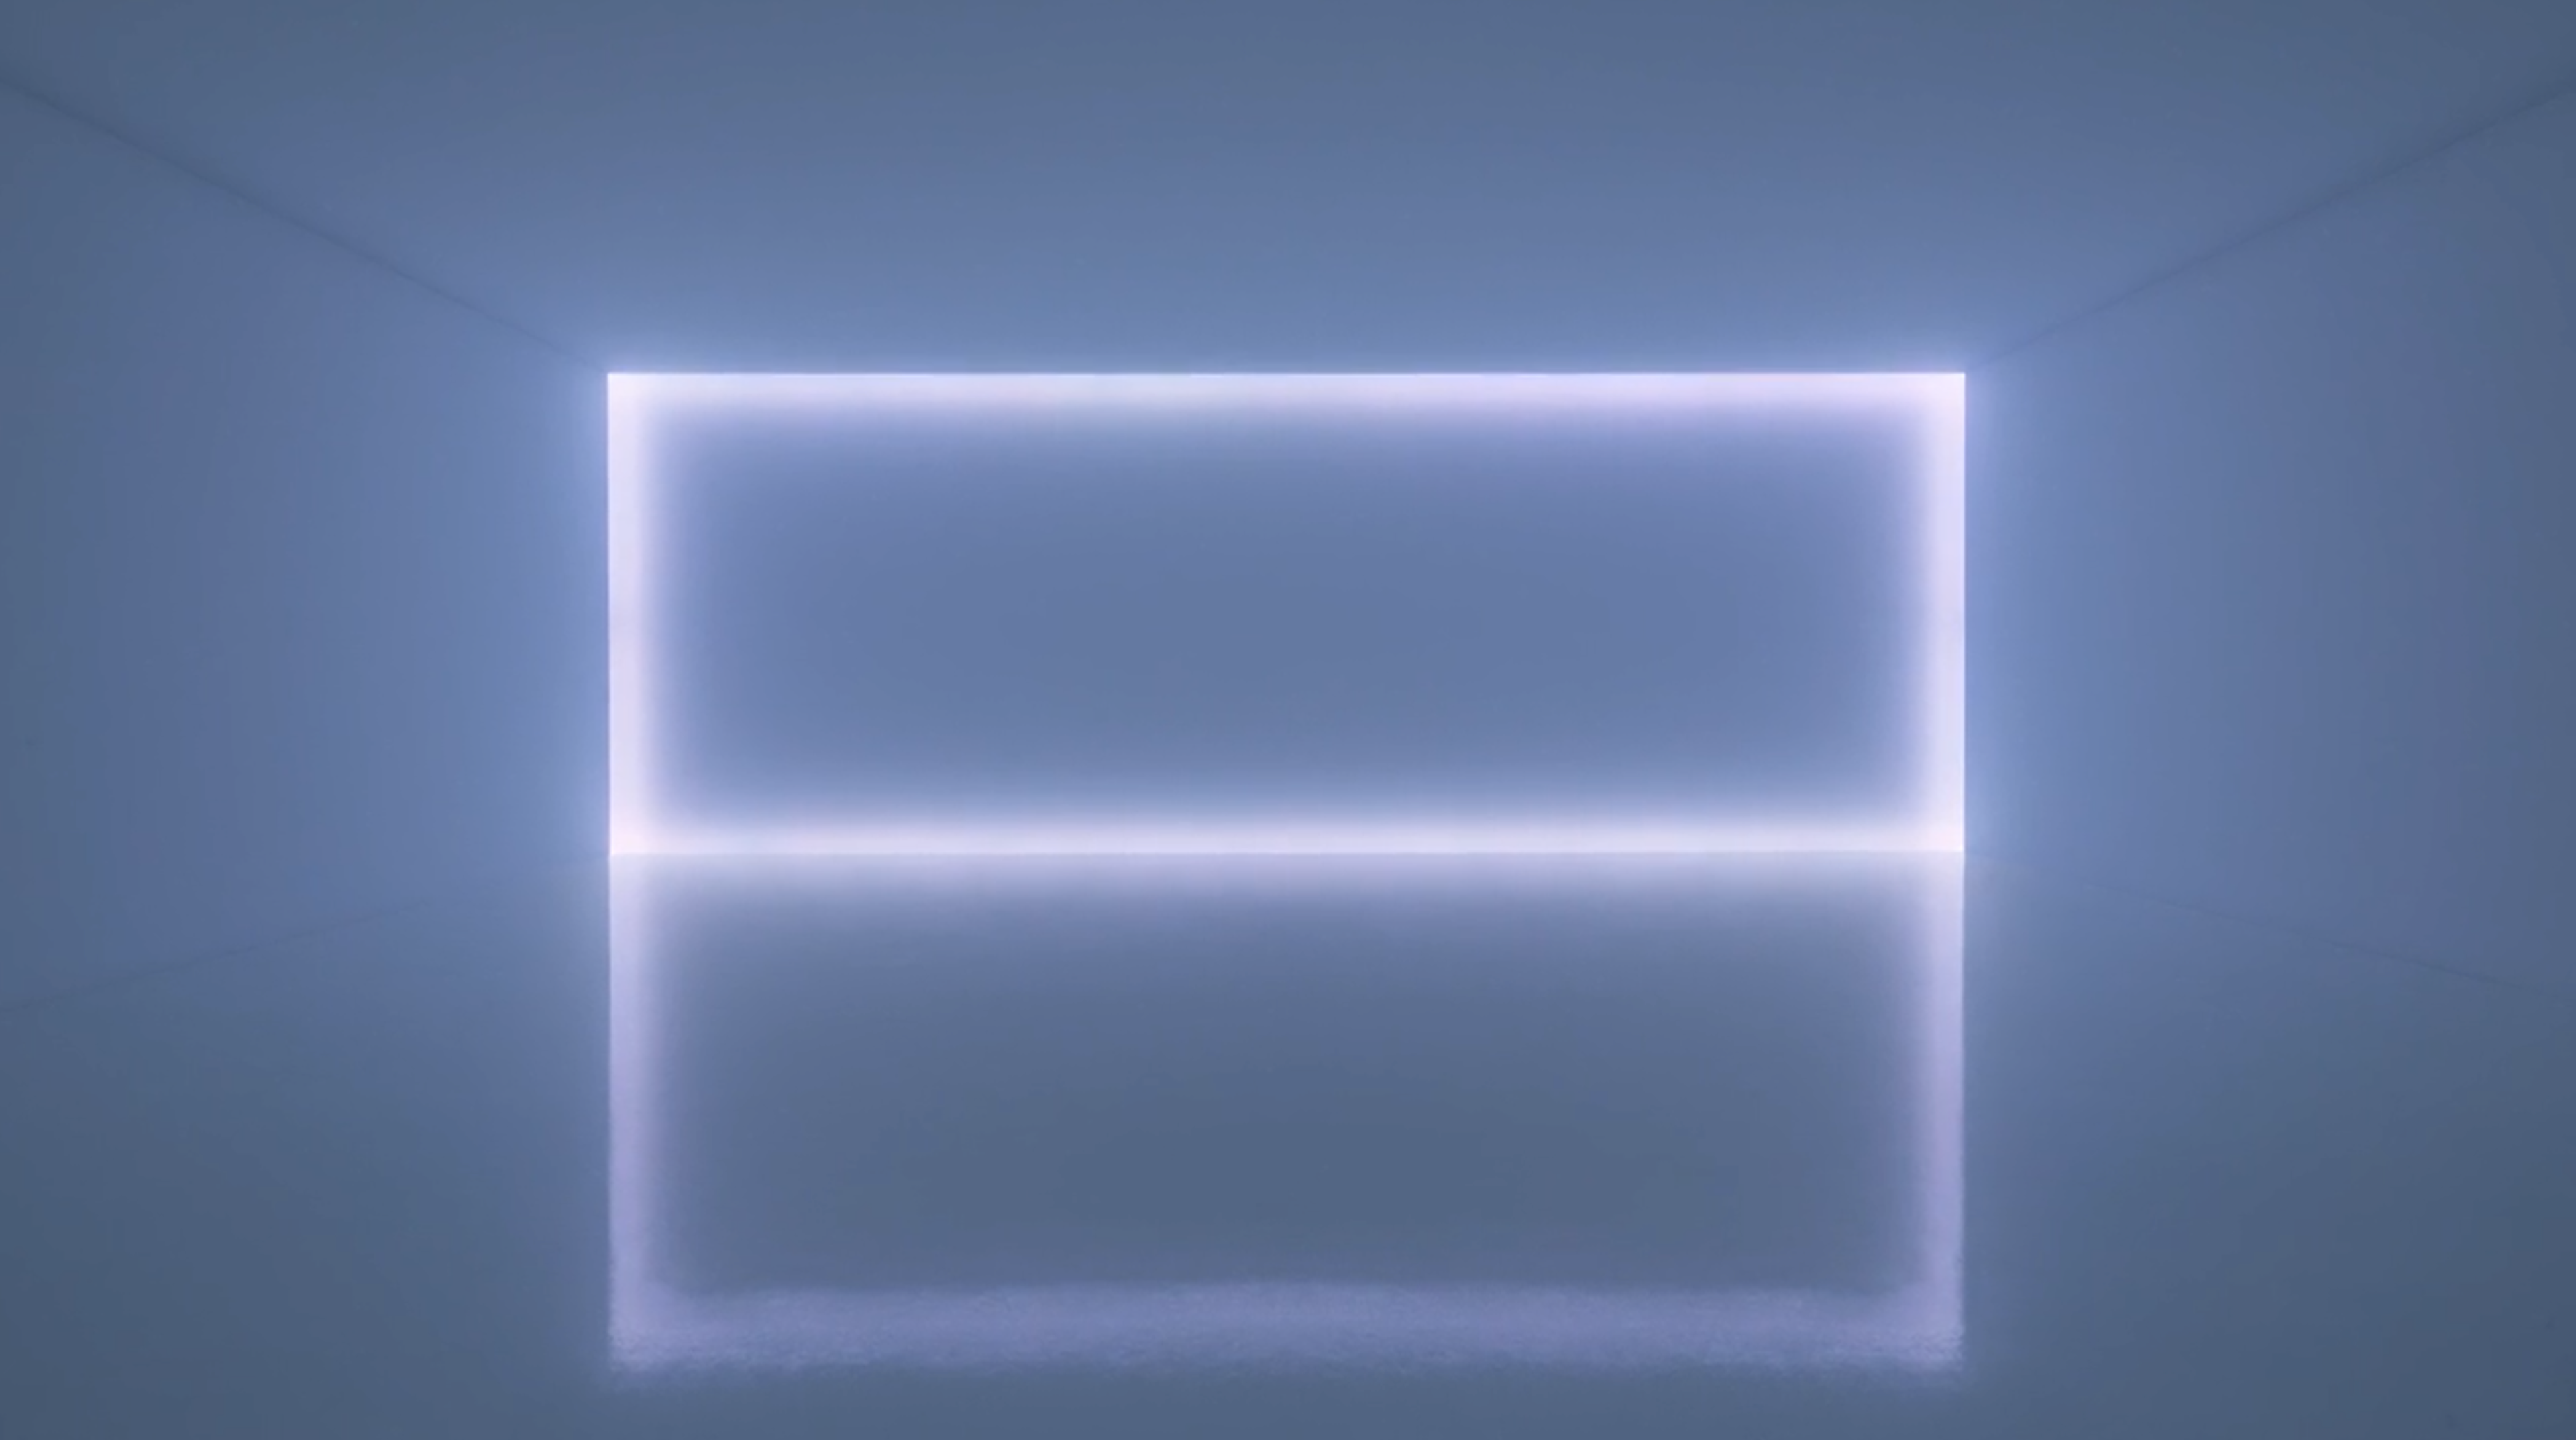 This screenshot shows an immersive work by Doug Wheeler: a thin, softly lit box at the end of a large white room.